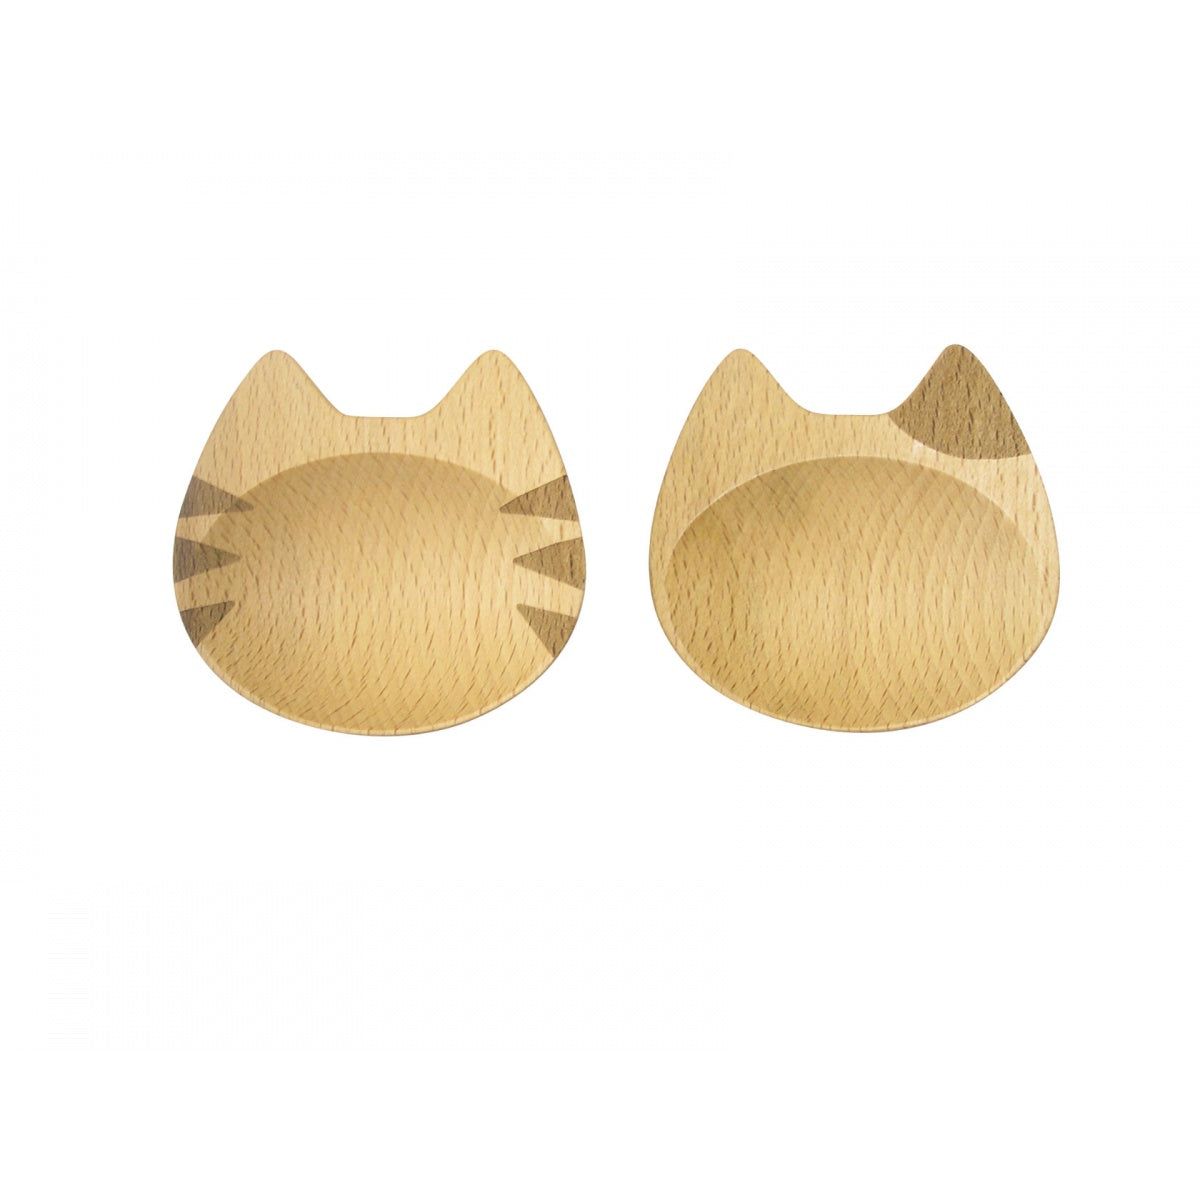 Wooden Cat Dishes